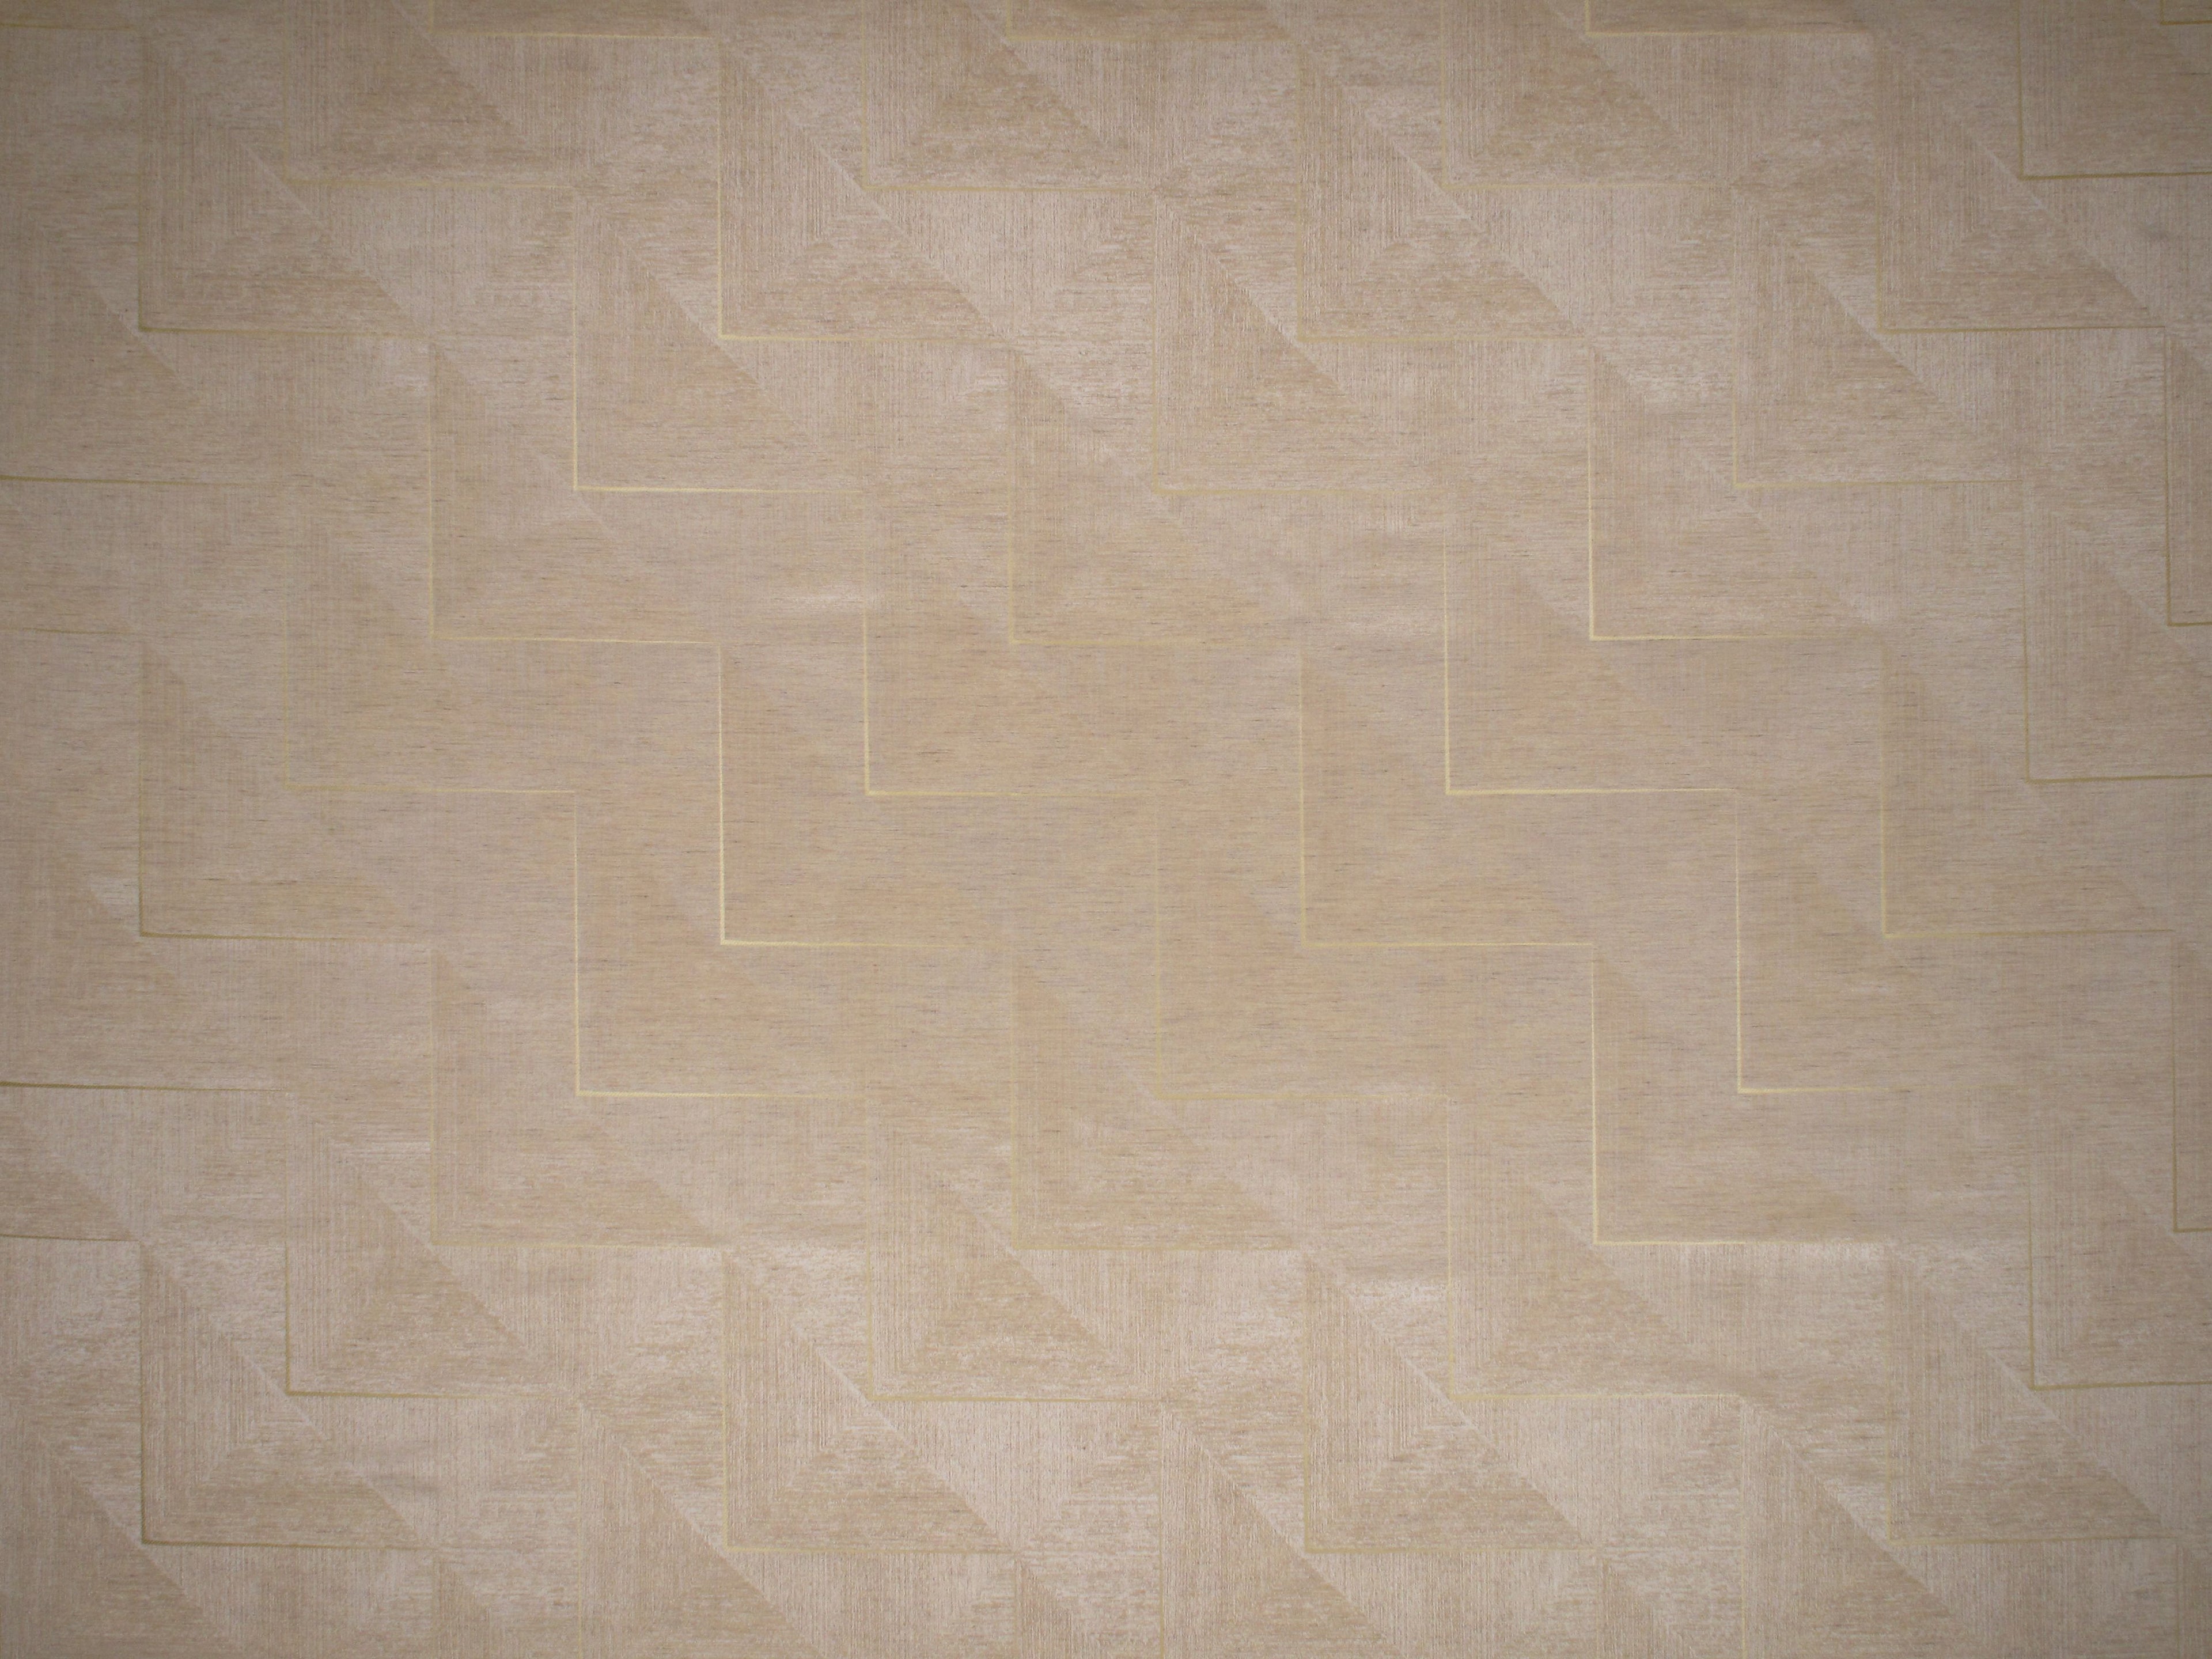 The Right Angle fabric in cream color - pattern number HB 00010629 - by Scalamandre in the Old World Weavers collection